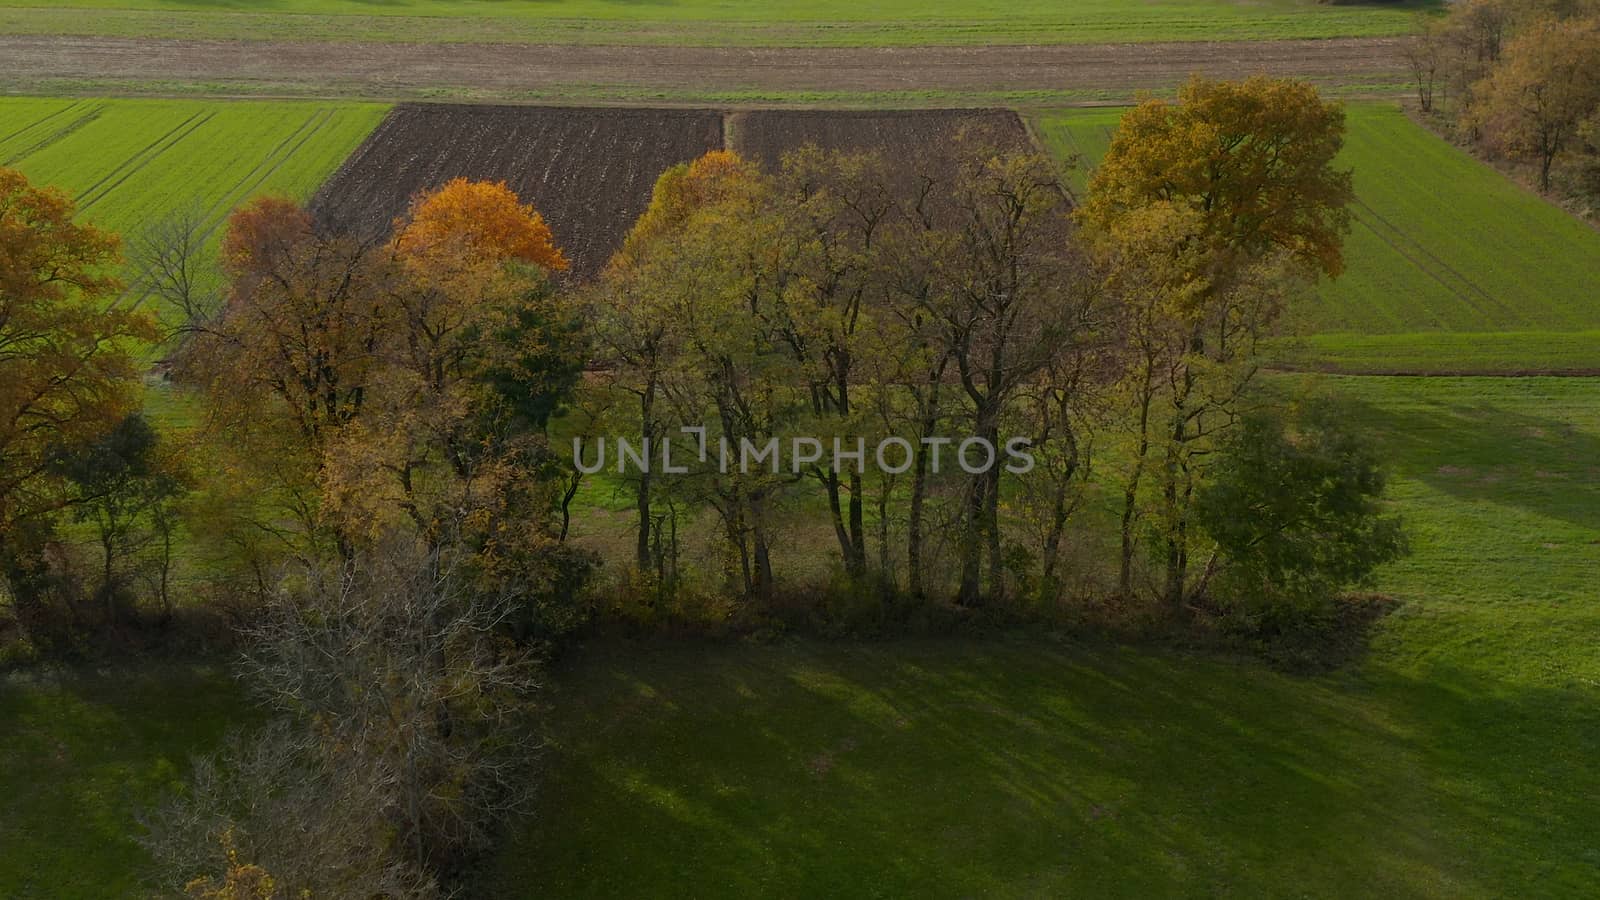 Aerial shot of trees in hedgerow, vibrant autumn foliage, dividing a meadow from a plowed field, typical central European landscape, Slovenia countryside